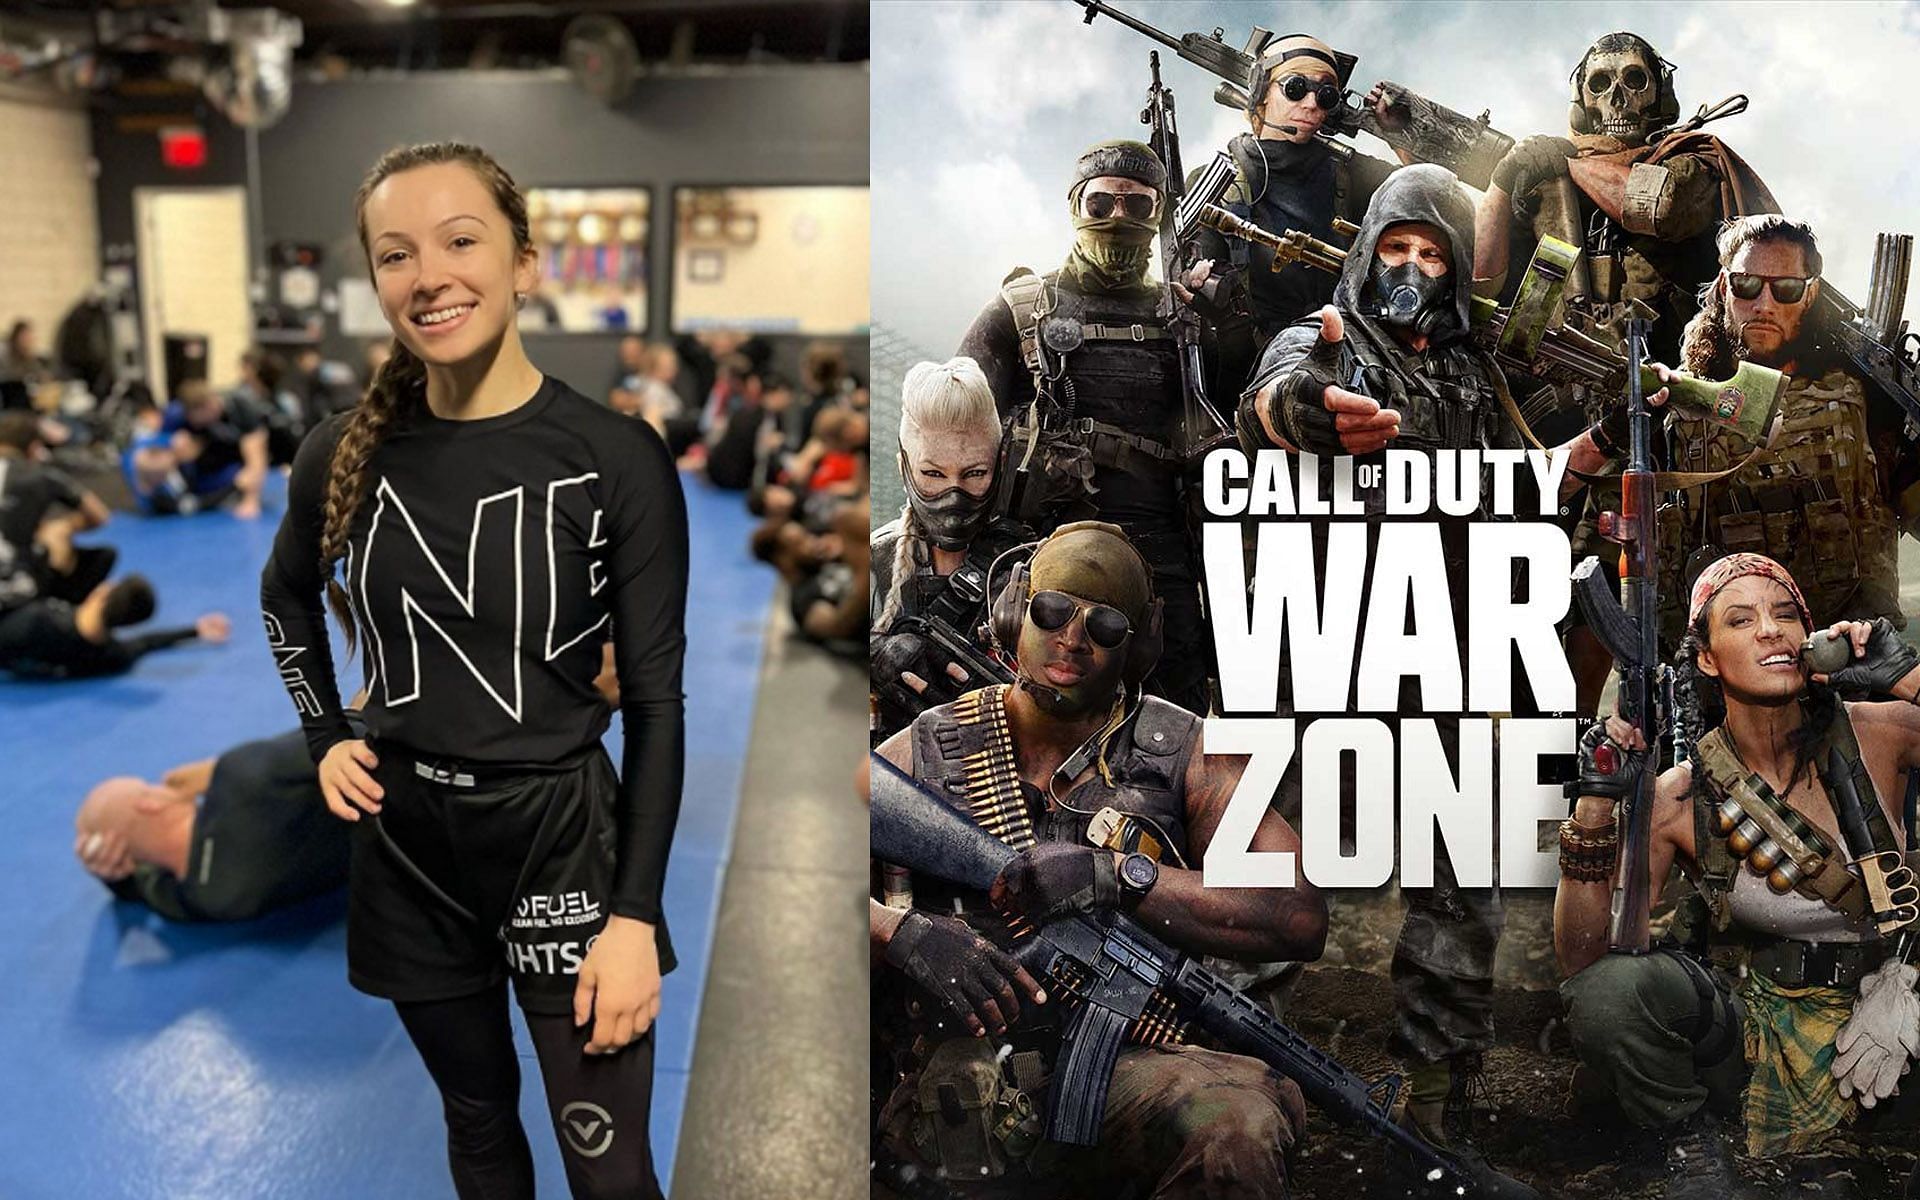 Danielle Kelly (L) got surprised when a fan recognized her while playing Call of Duty: Warzone (R). | [Photos: @daniellekelly on Instagram/Call of Duty]